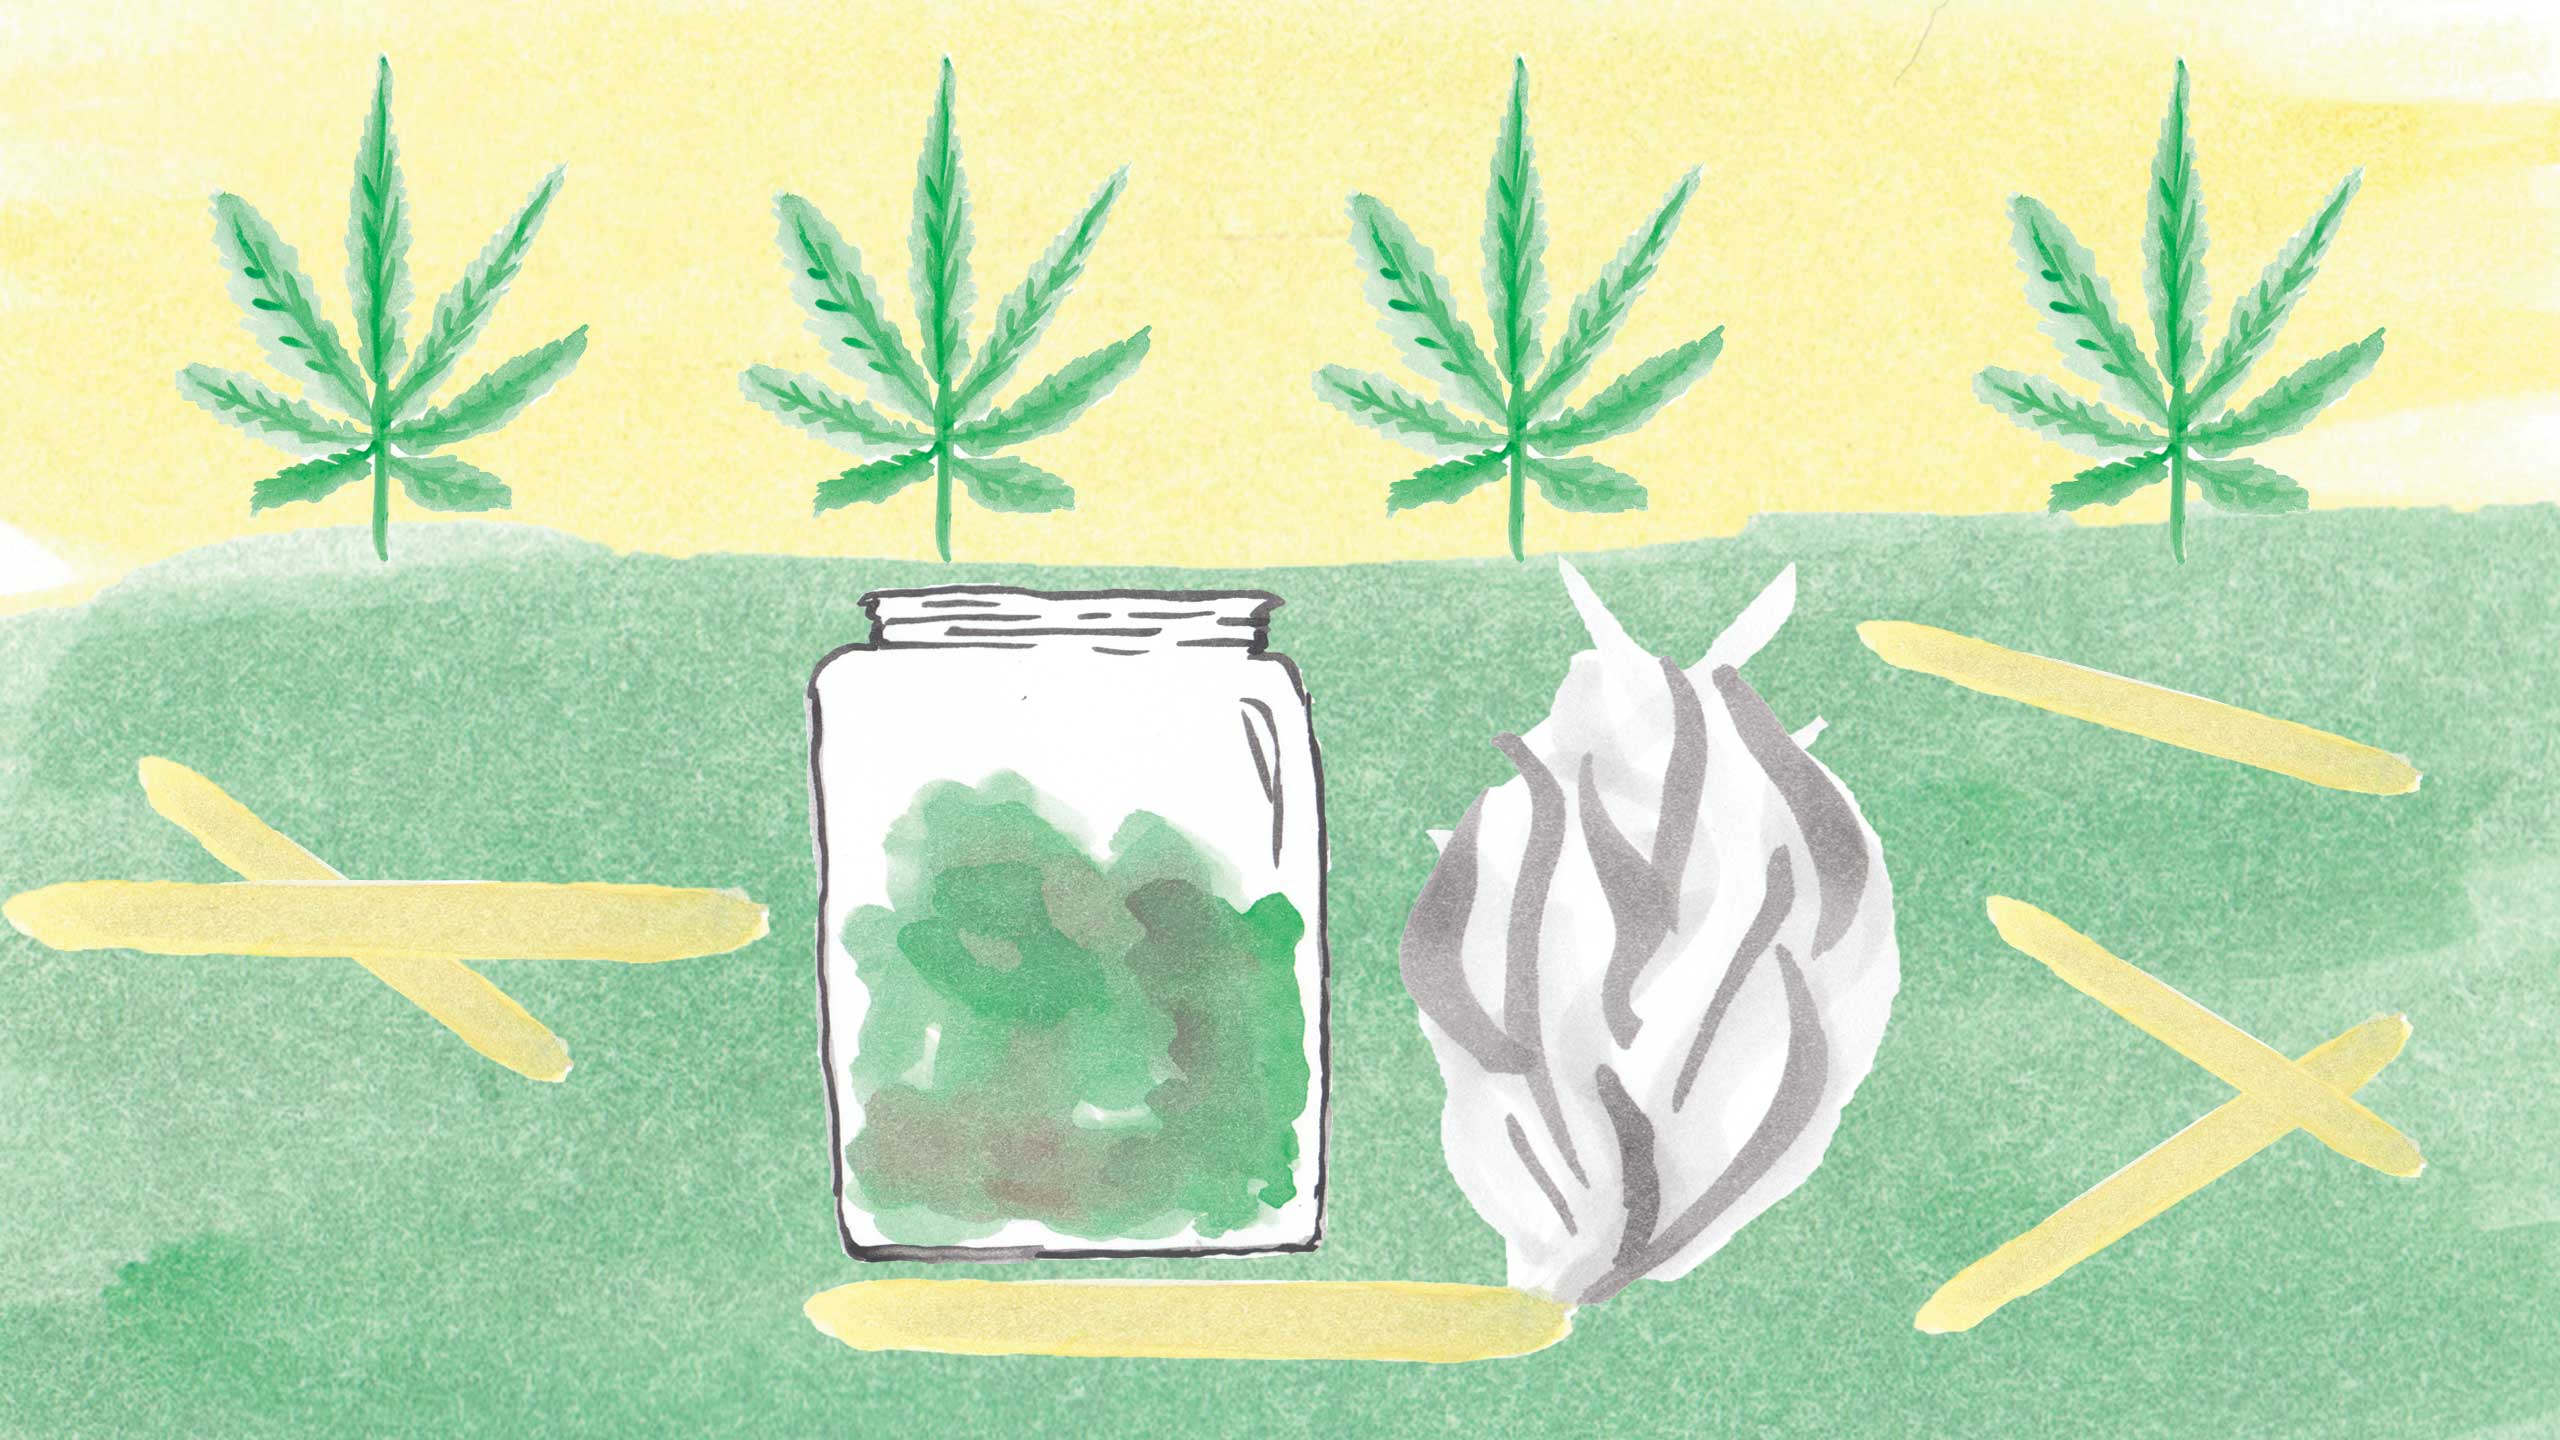 With marijuana legalization just under a year away, what will happen to the medicinal users when their supplies are controlled by the government? ILLUSTRATION BY SKYLER ASH